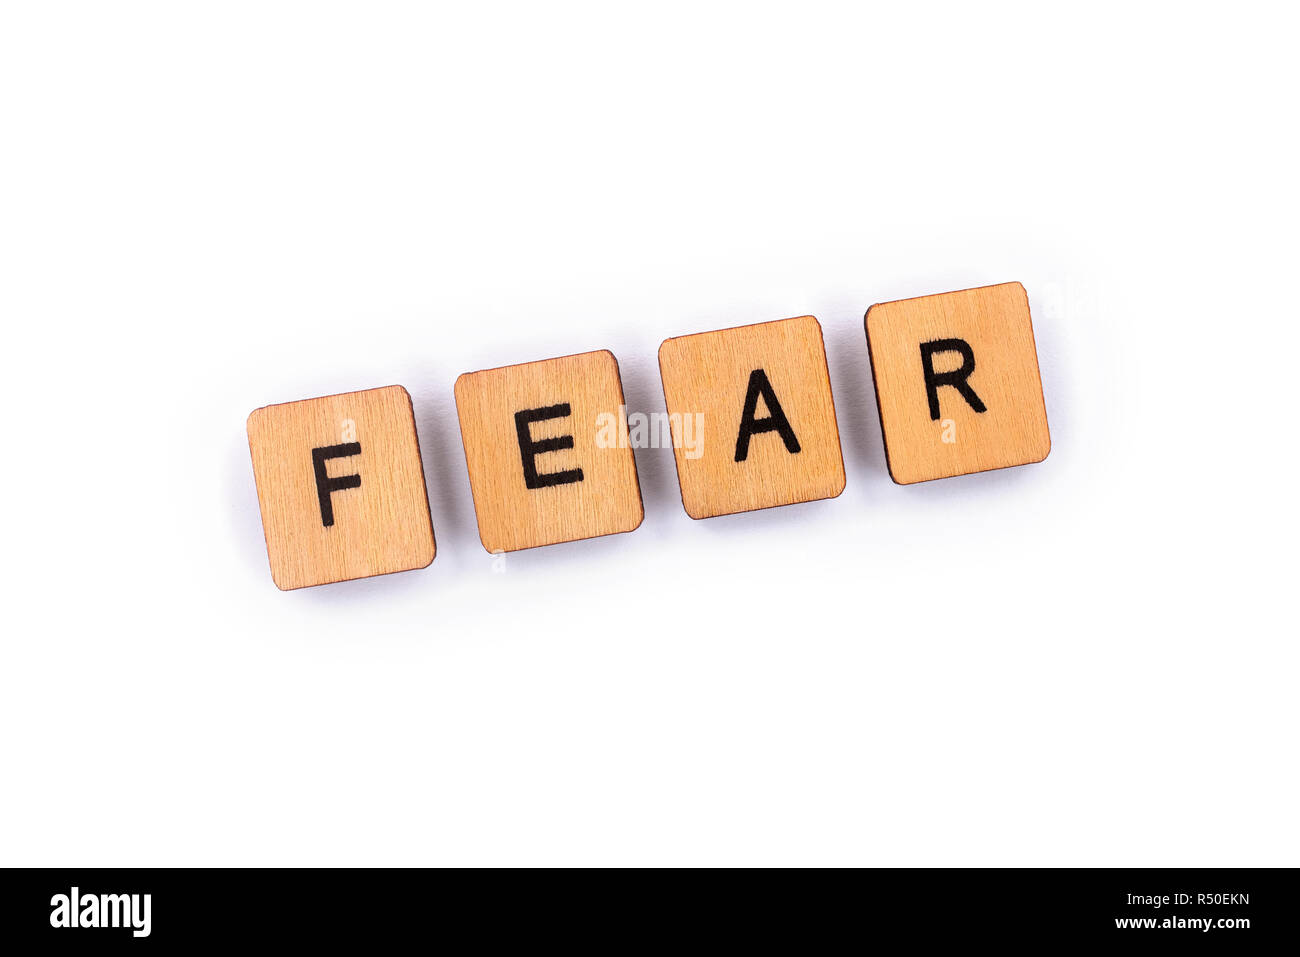 FEAR, spelt with wooden letter tiles over a plain white background. Stock Photo